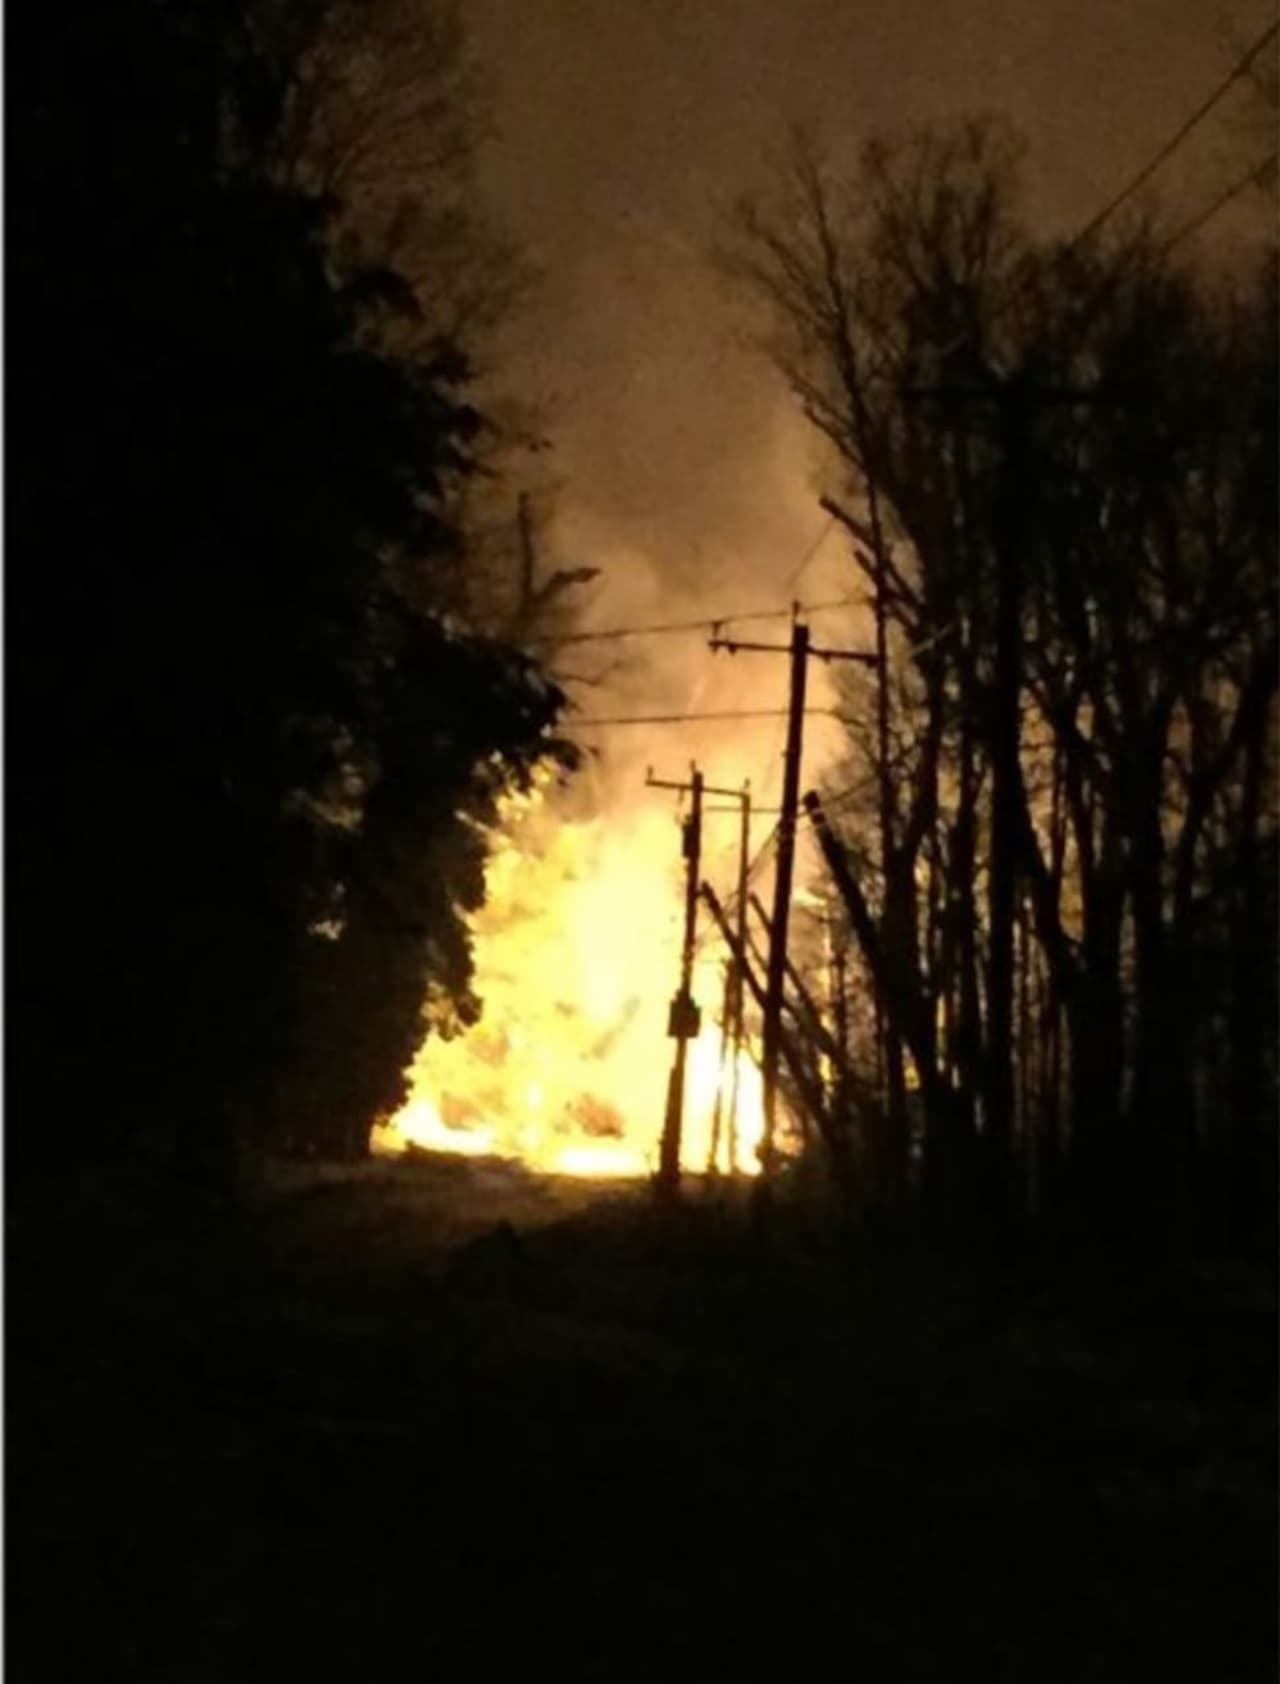 Downed power lines caught fire in New Canaan on Wednesday night.